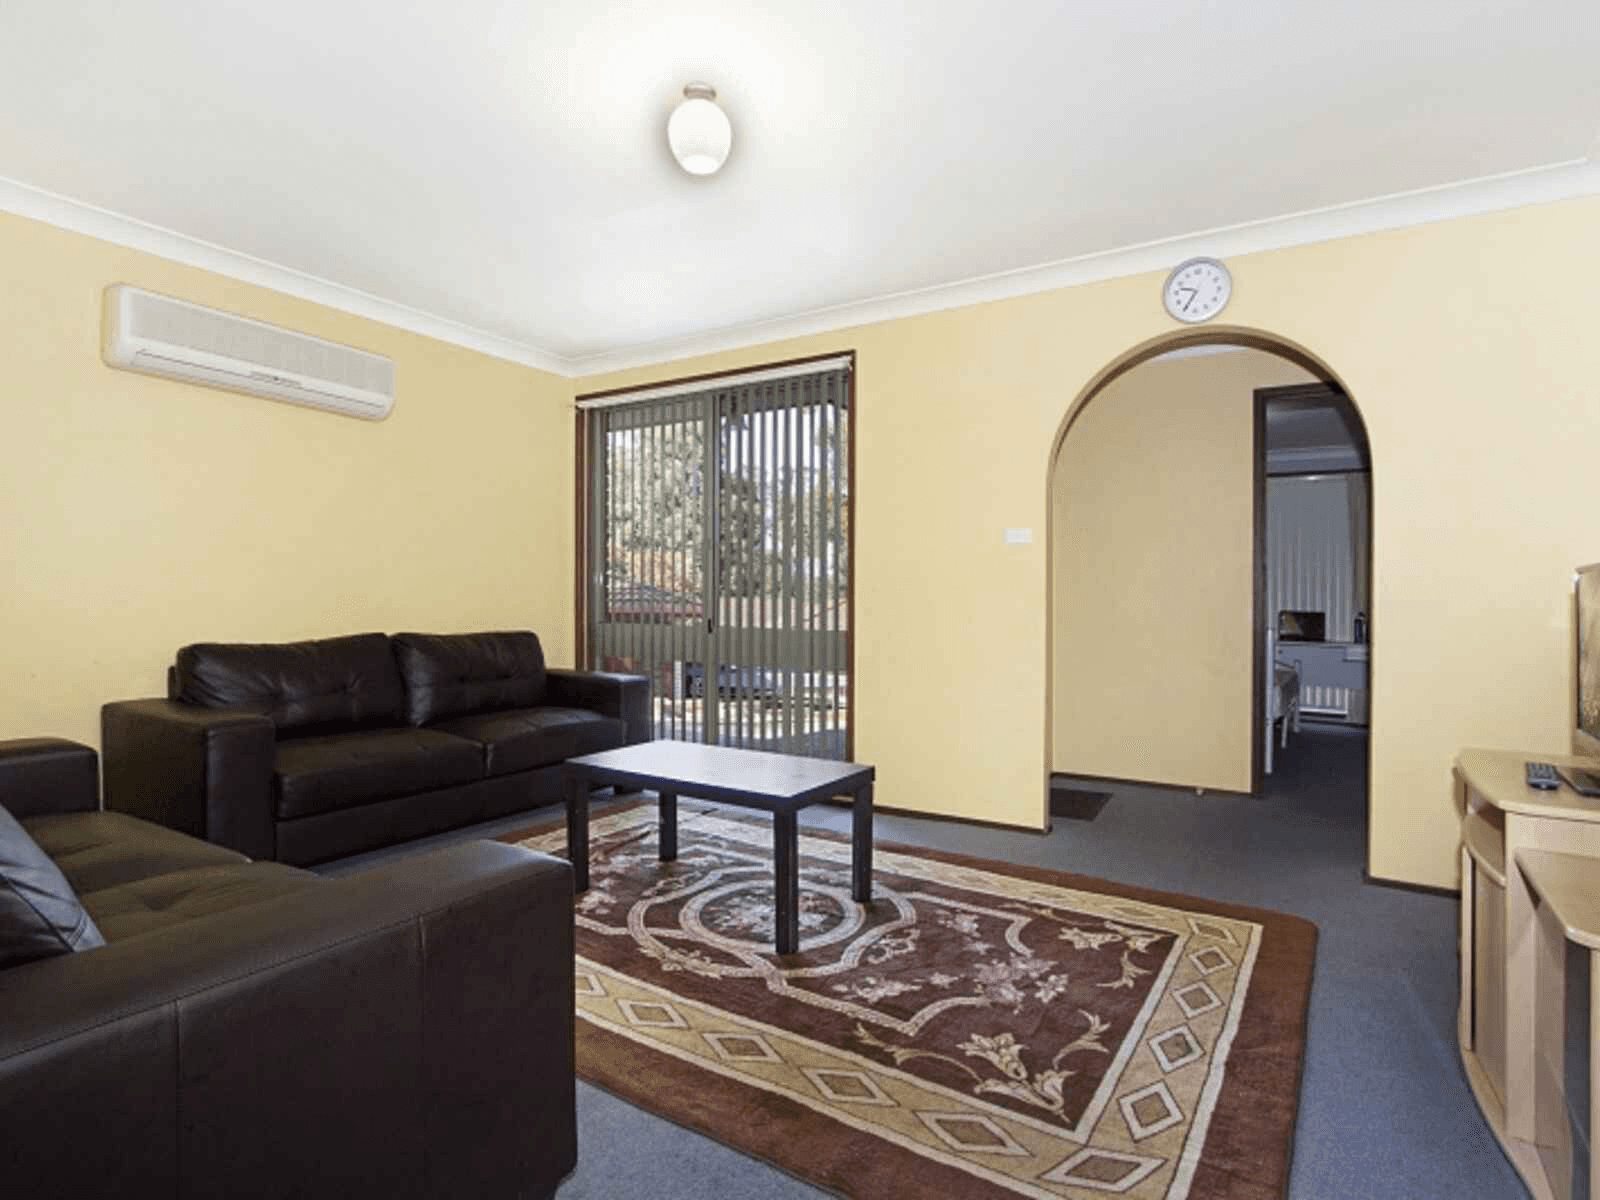 6 Tully Place, Quakers Hill, NSW 2763